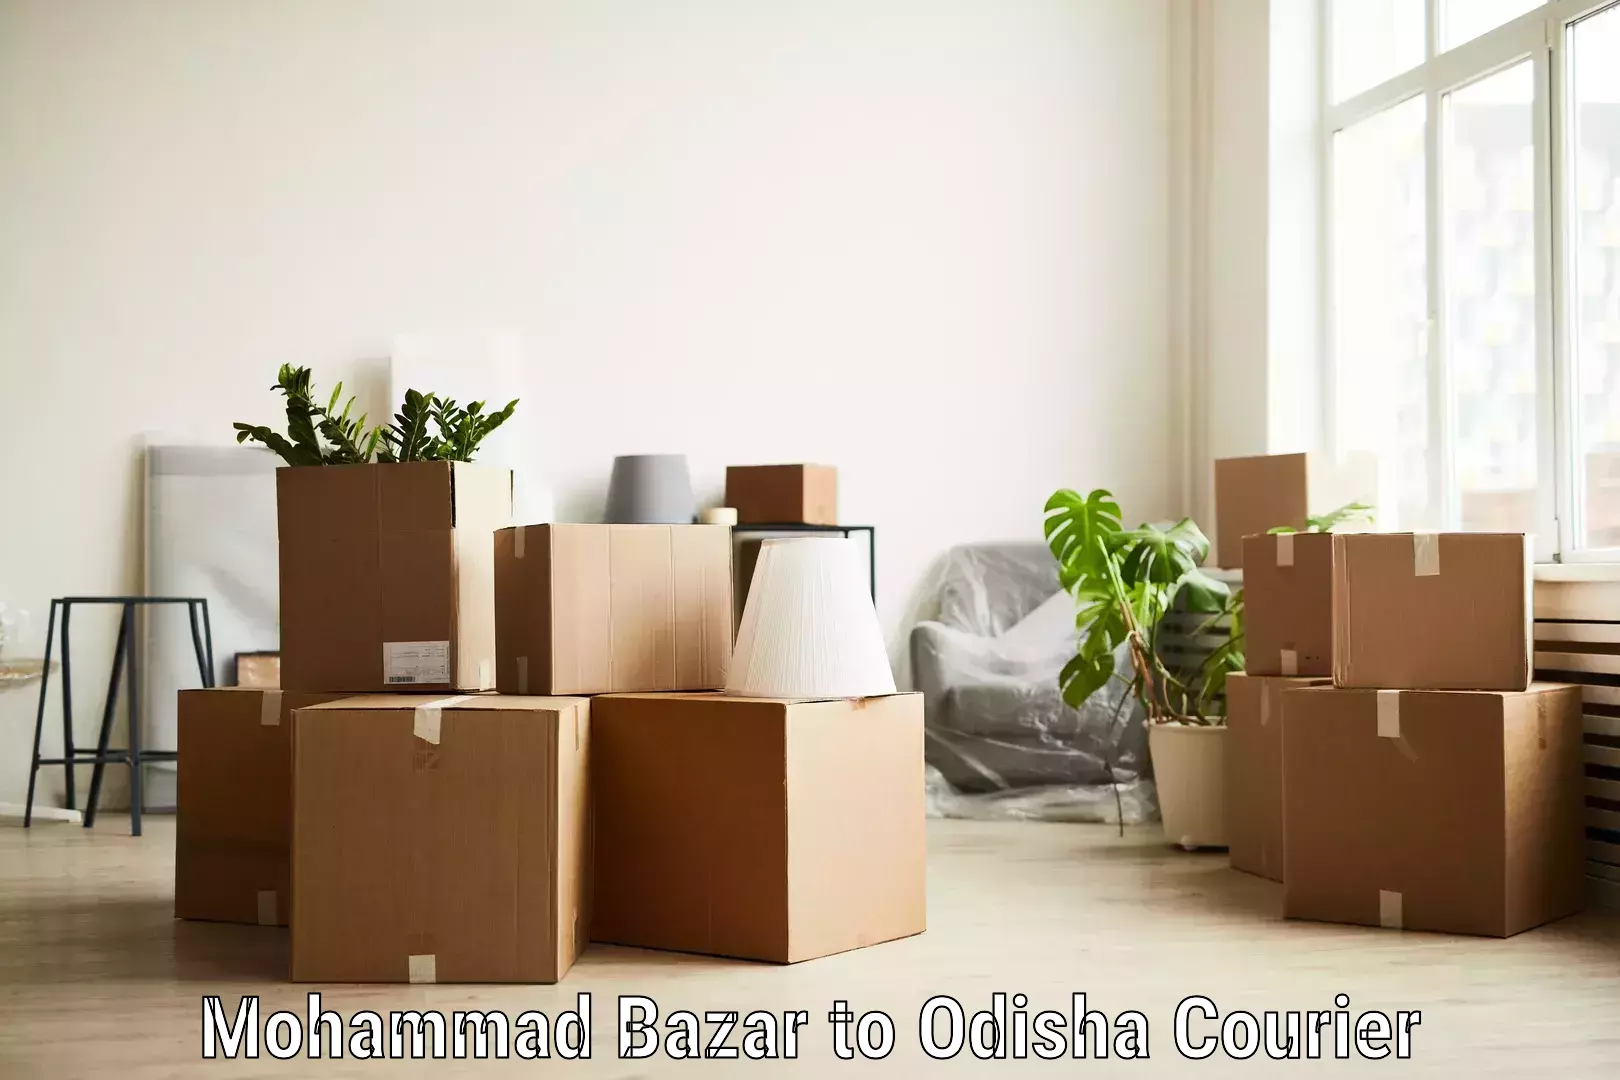 Subscription-based courier Mohammad Bazar to Odisha